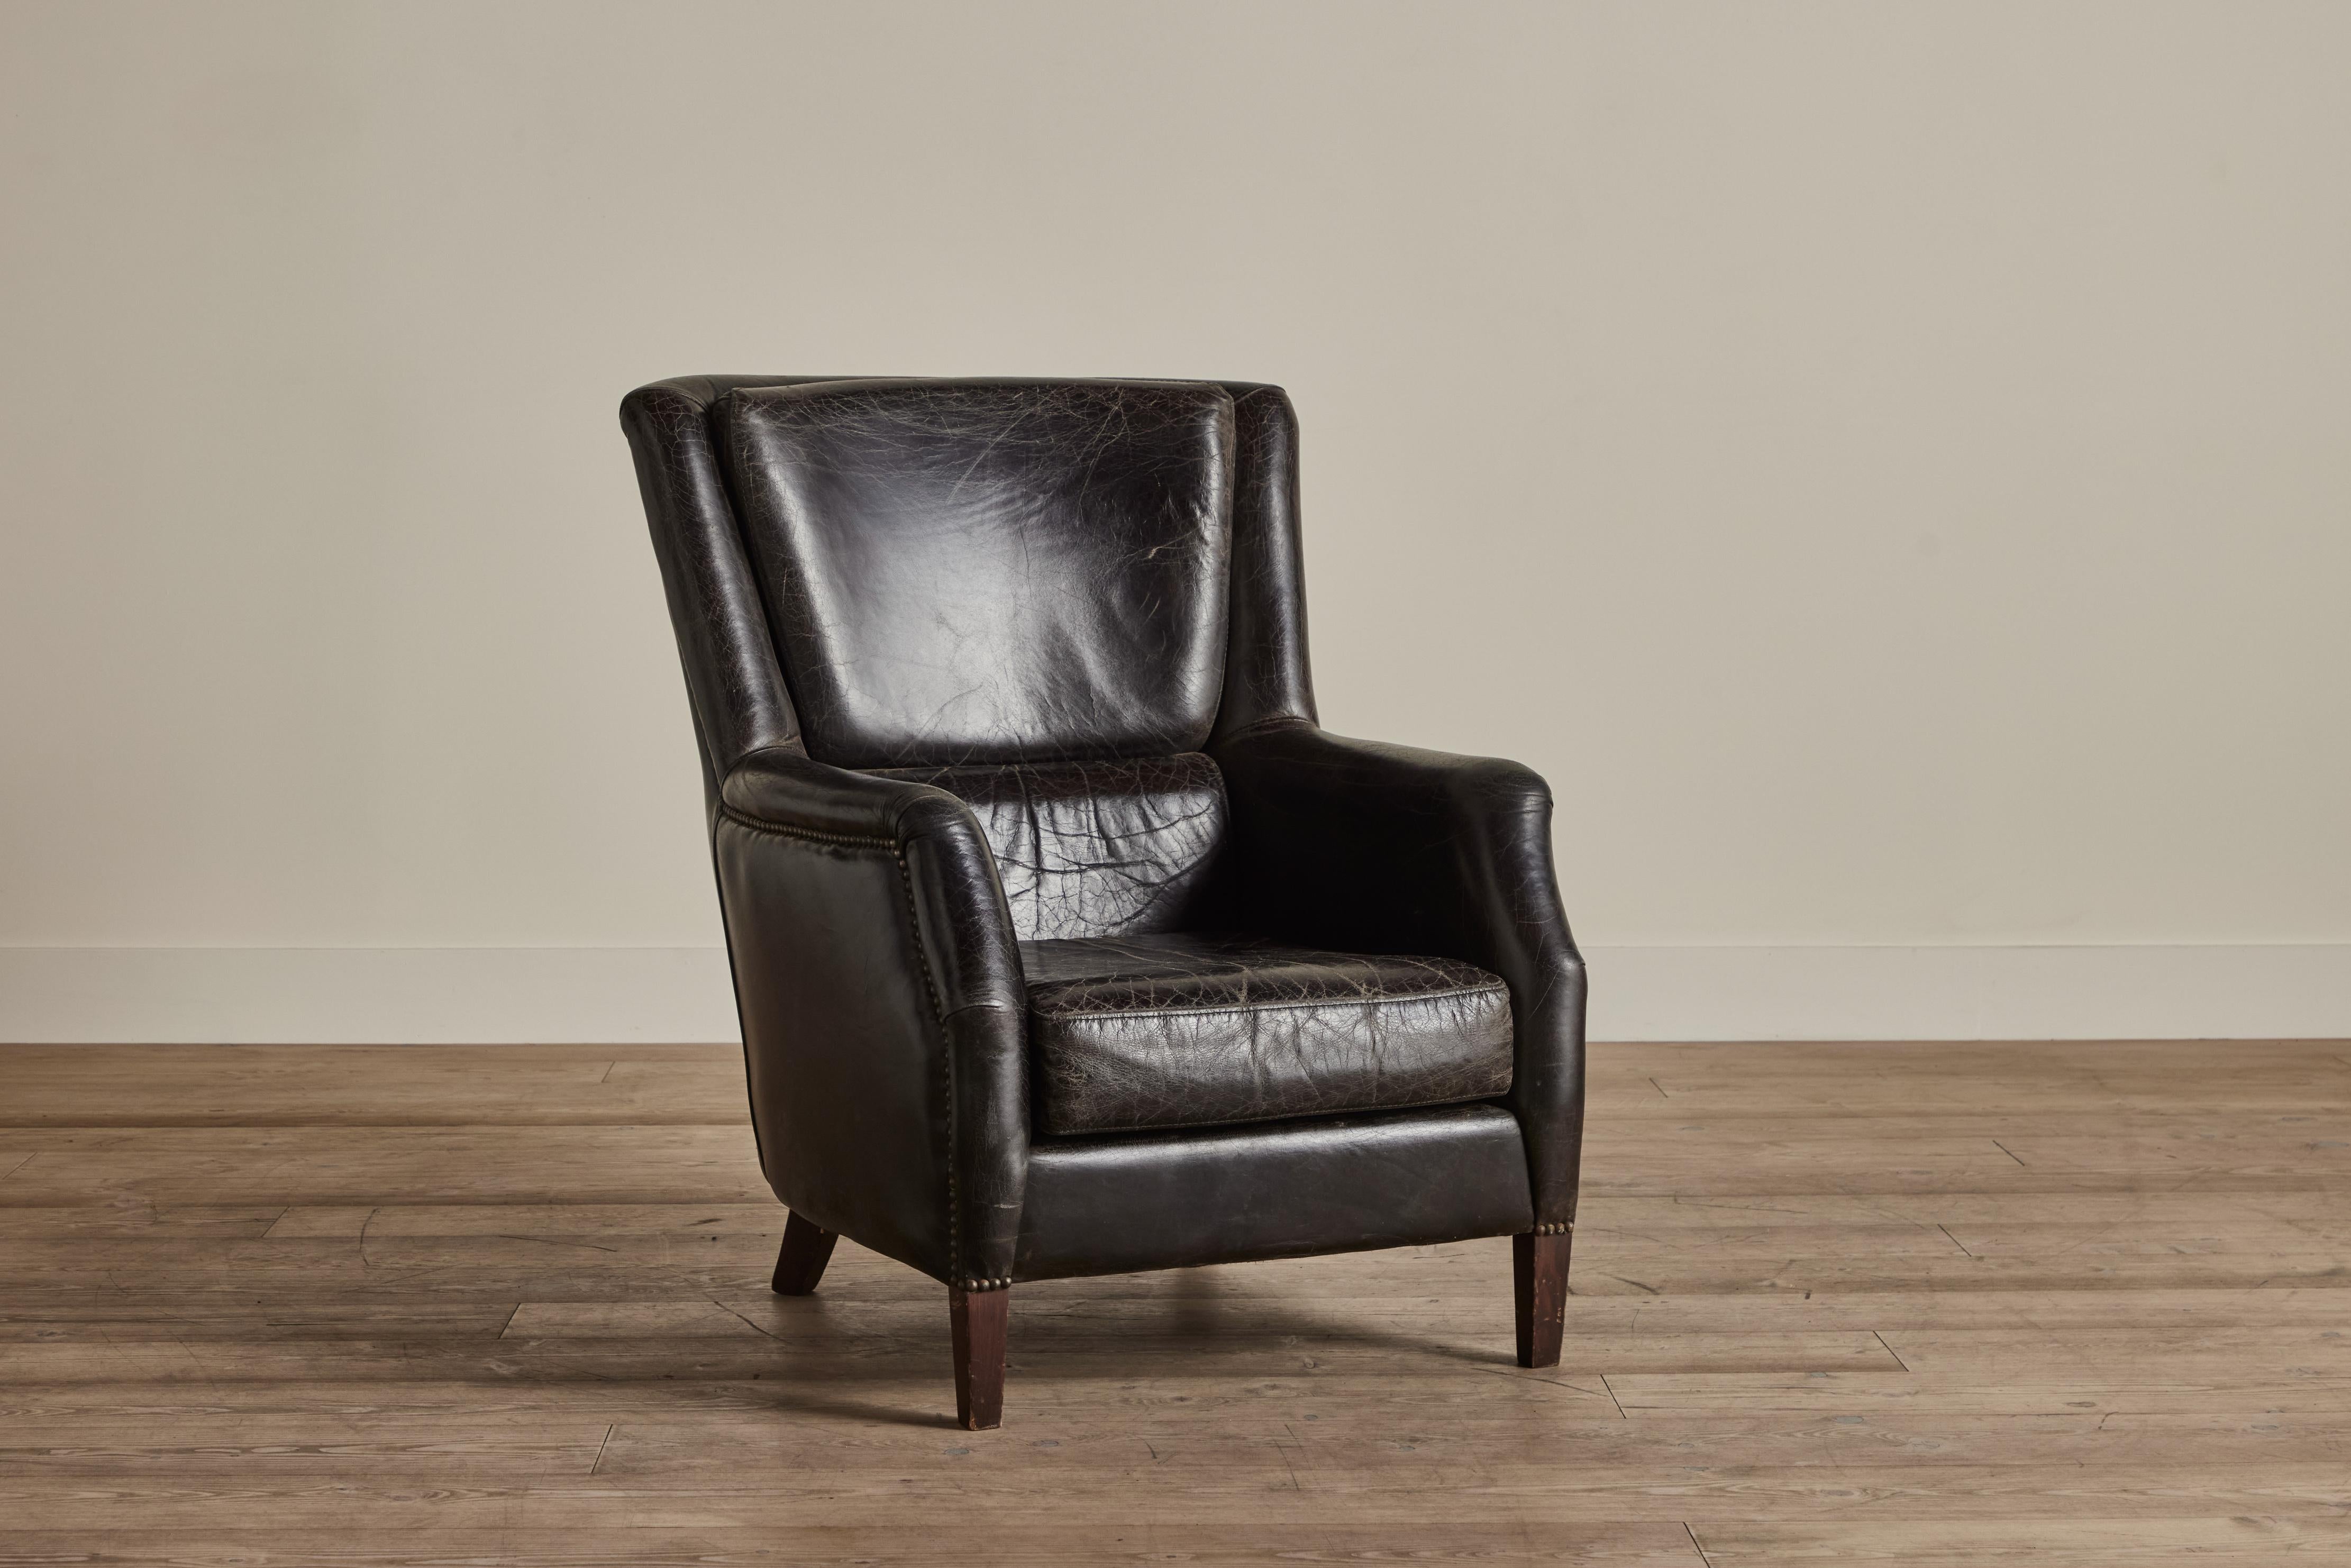 1960s high back black leather chair from Denmark. Some wear on leather that is consistent with age and use. 